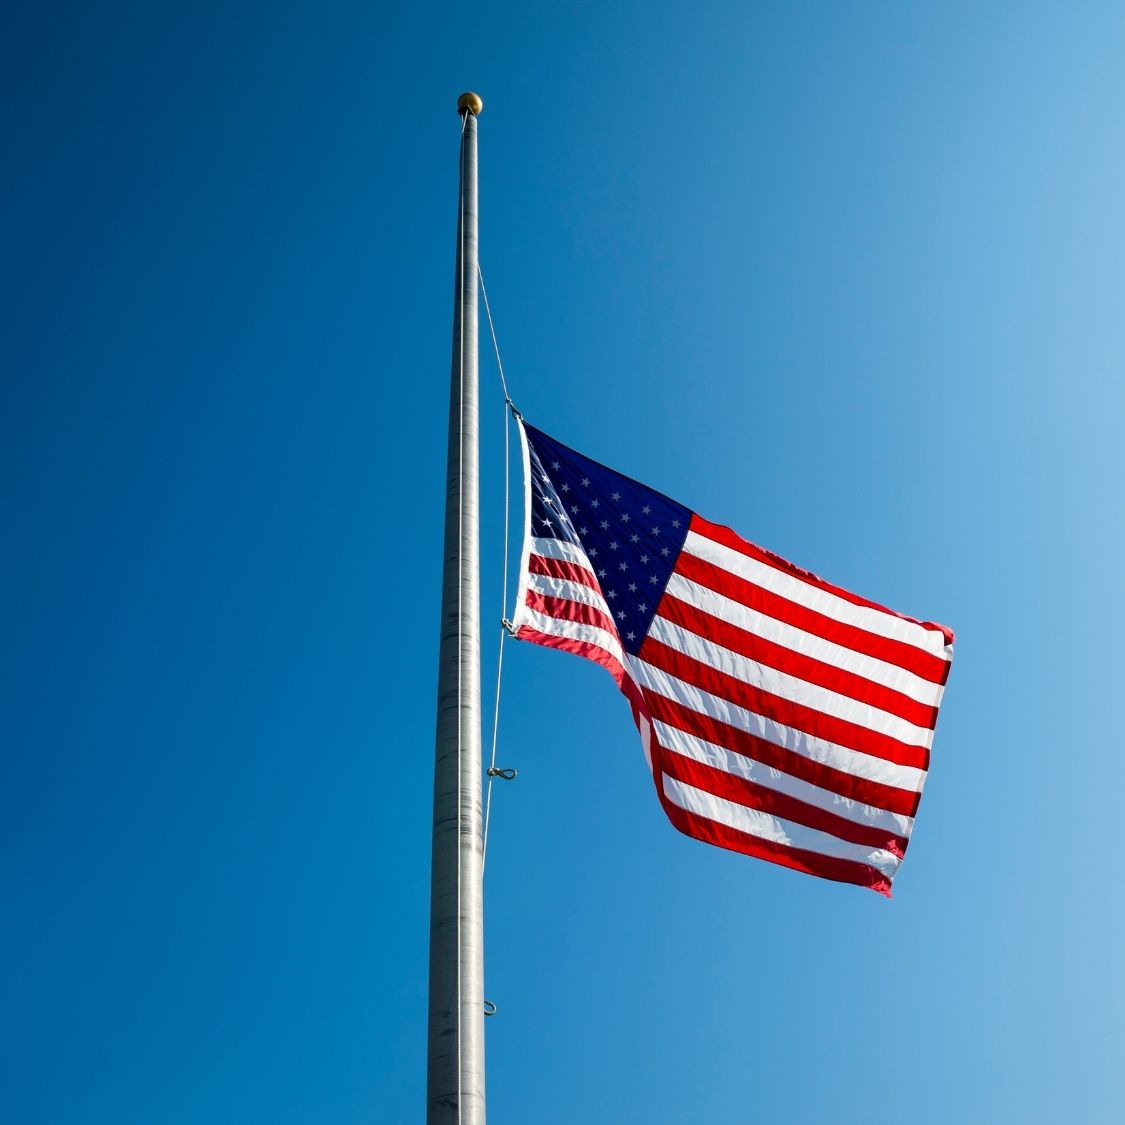 Why Do We Fly Our Flags at Half-Mast in America?